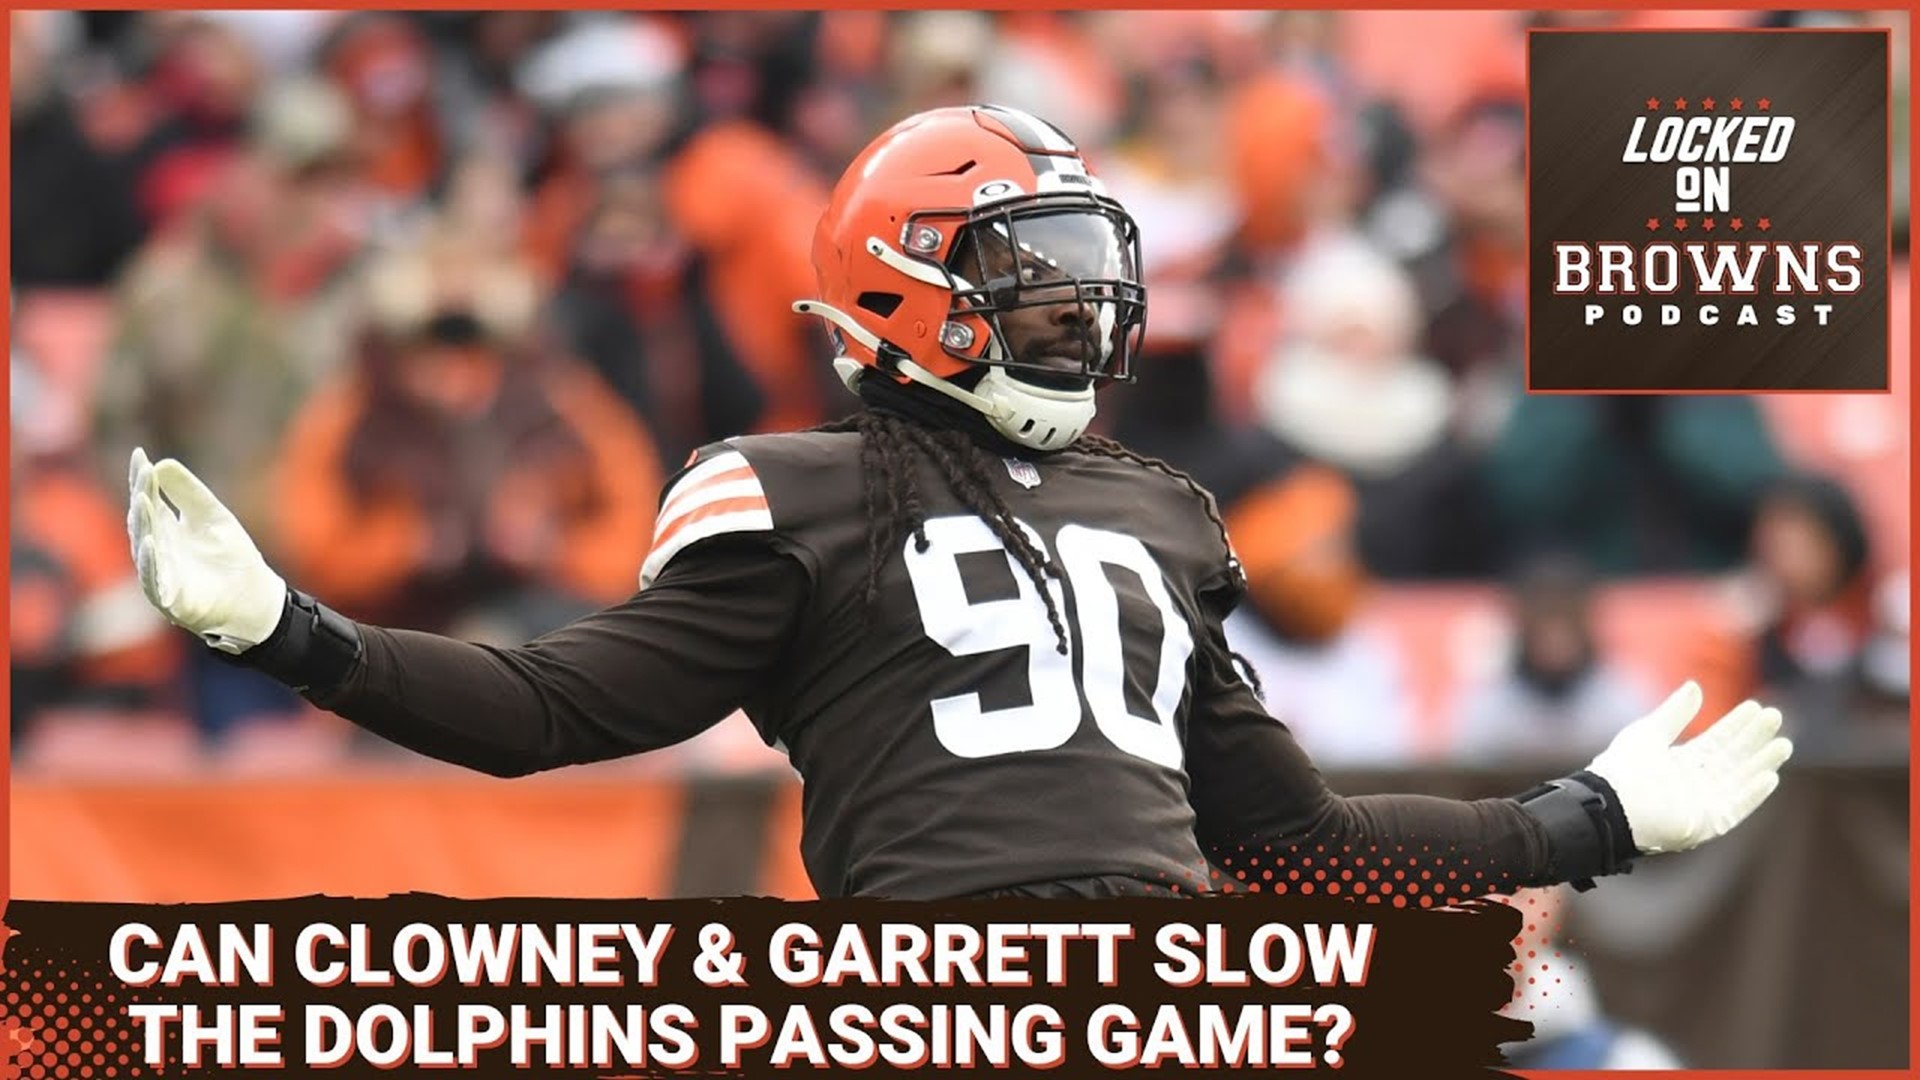 We take a look at the Cleveland Browns defense and see if they can slow down the Miami Dolphins passing attack.